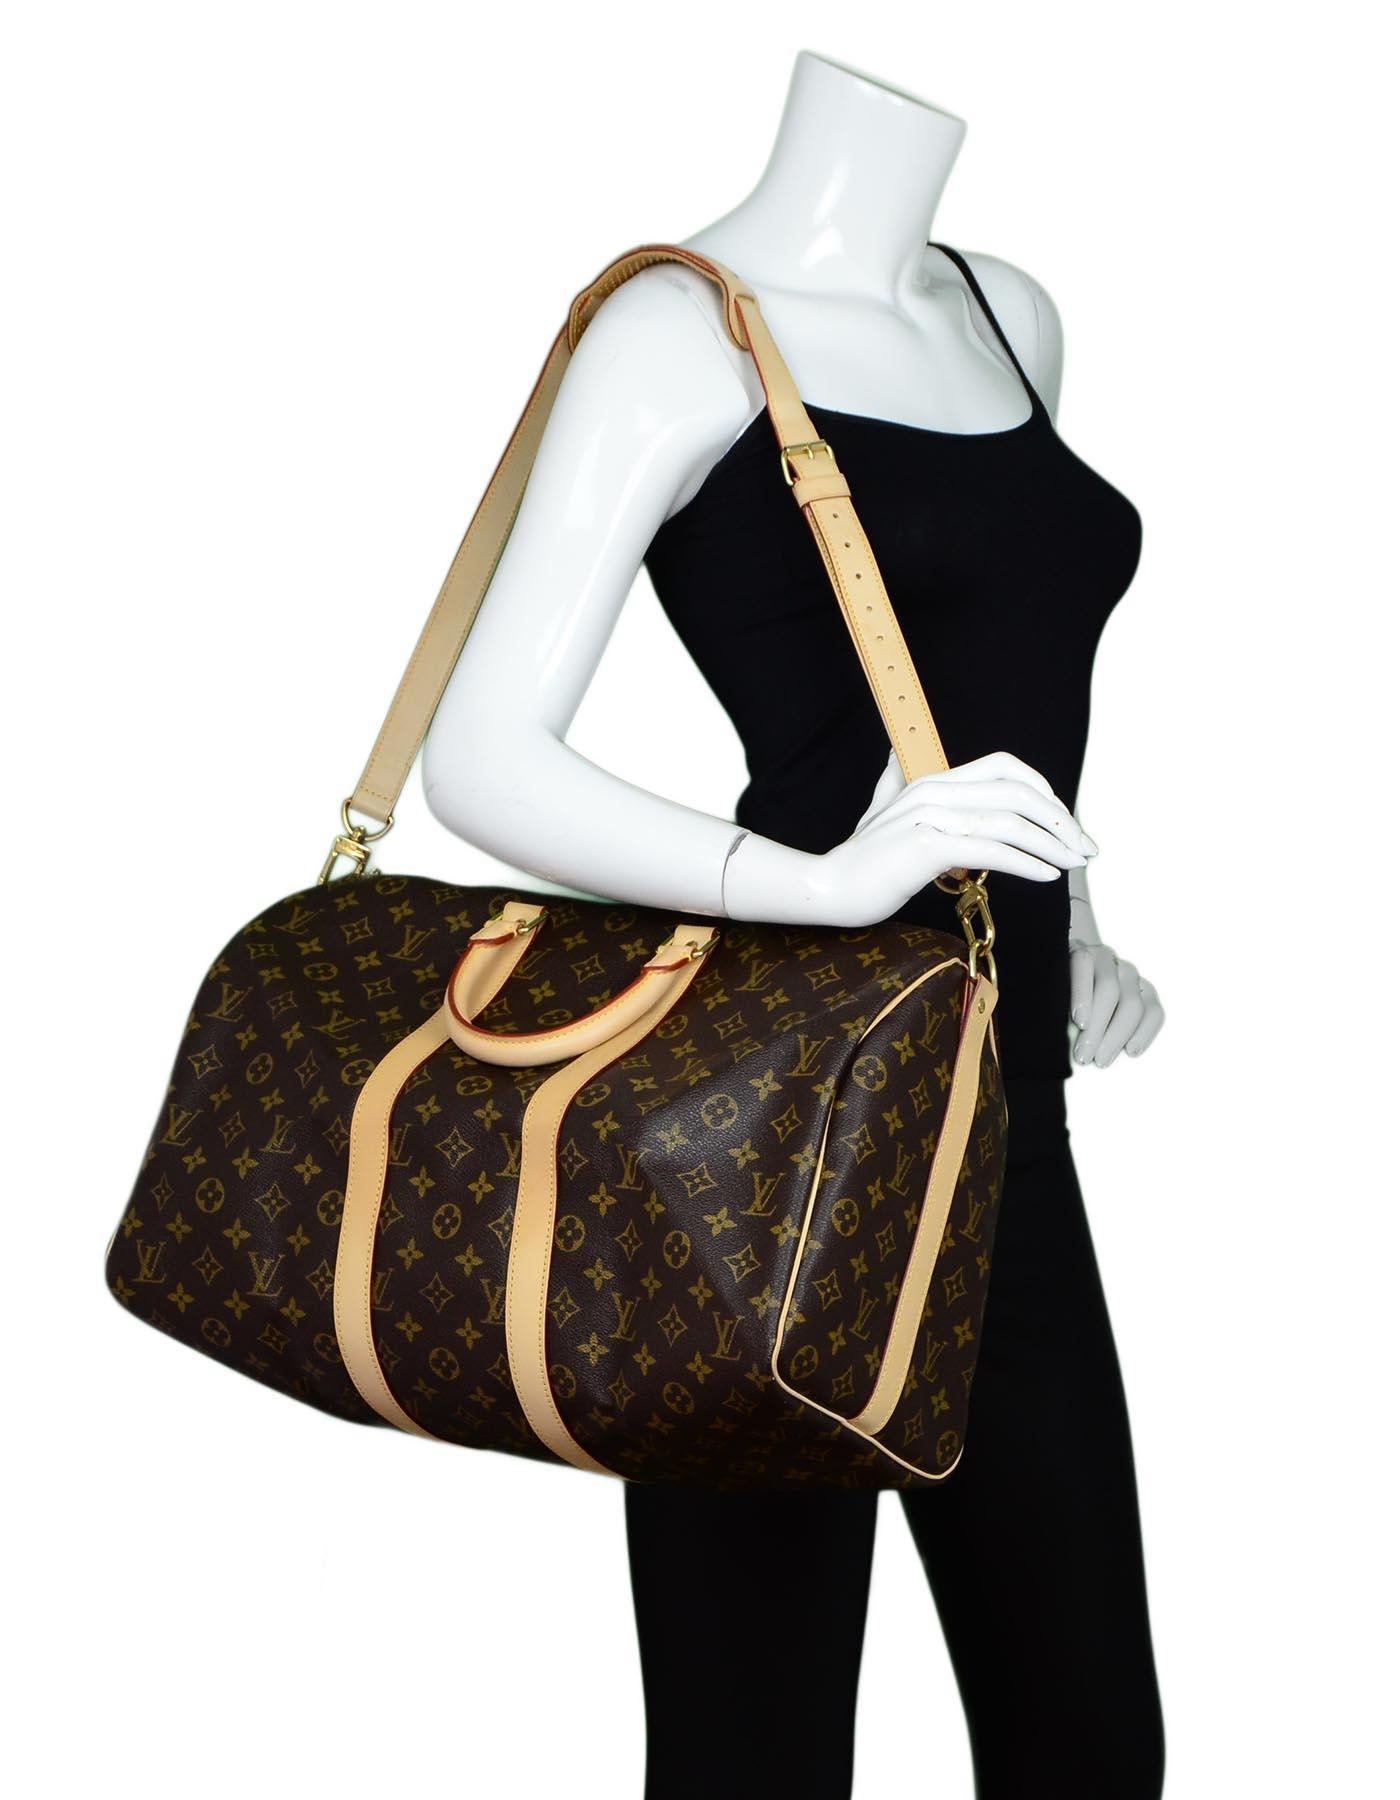 Louis Vuitton LV Monogram Canvas Keepall Bandouliere 45 Duffle Bag W/ Lock & Keys Unisex

Made In: France
Year of Production: 2009
Color: Brown/tan
Hardware: Goldtone
Materials: Coated canvas, leather
Lining: Brown canvas
Closure/Opening: Zip top